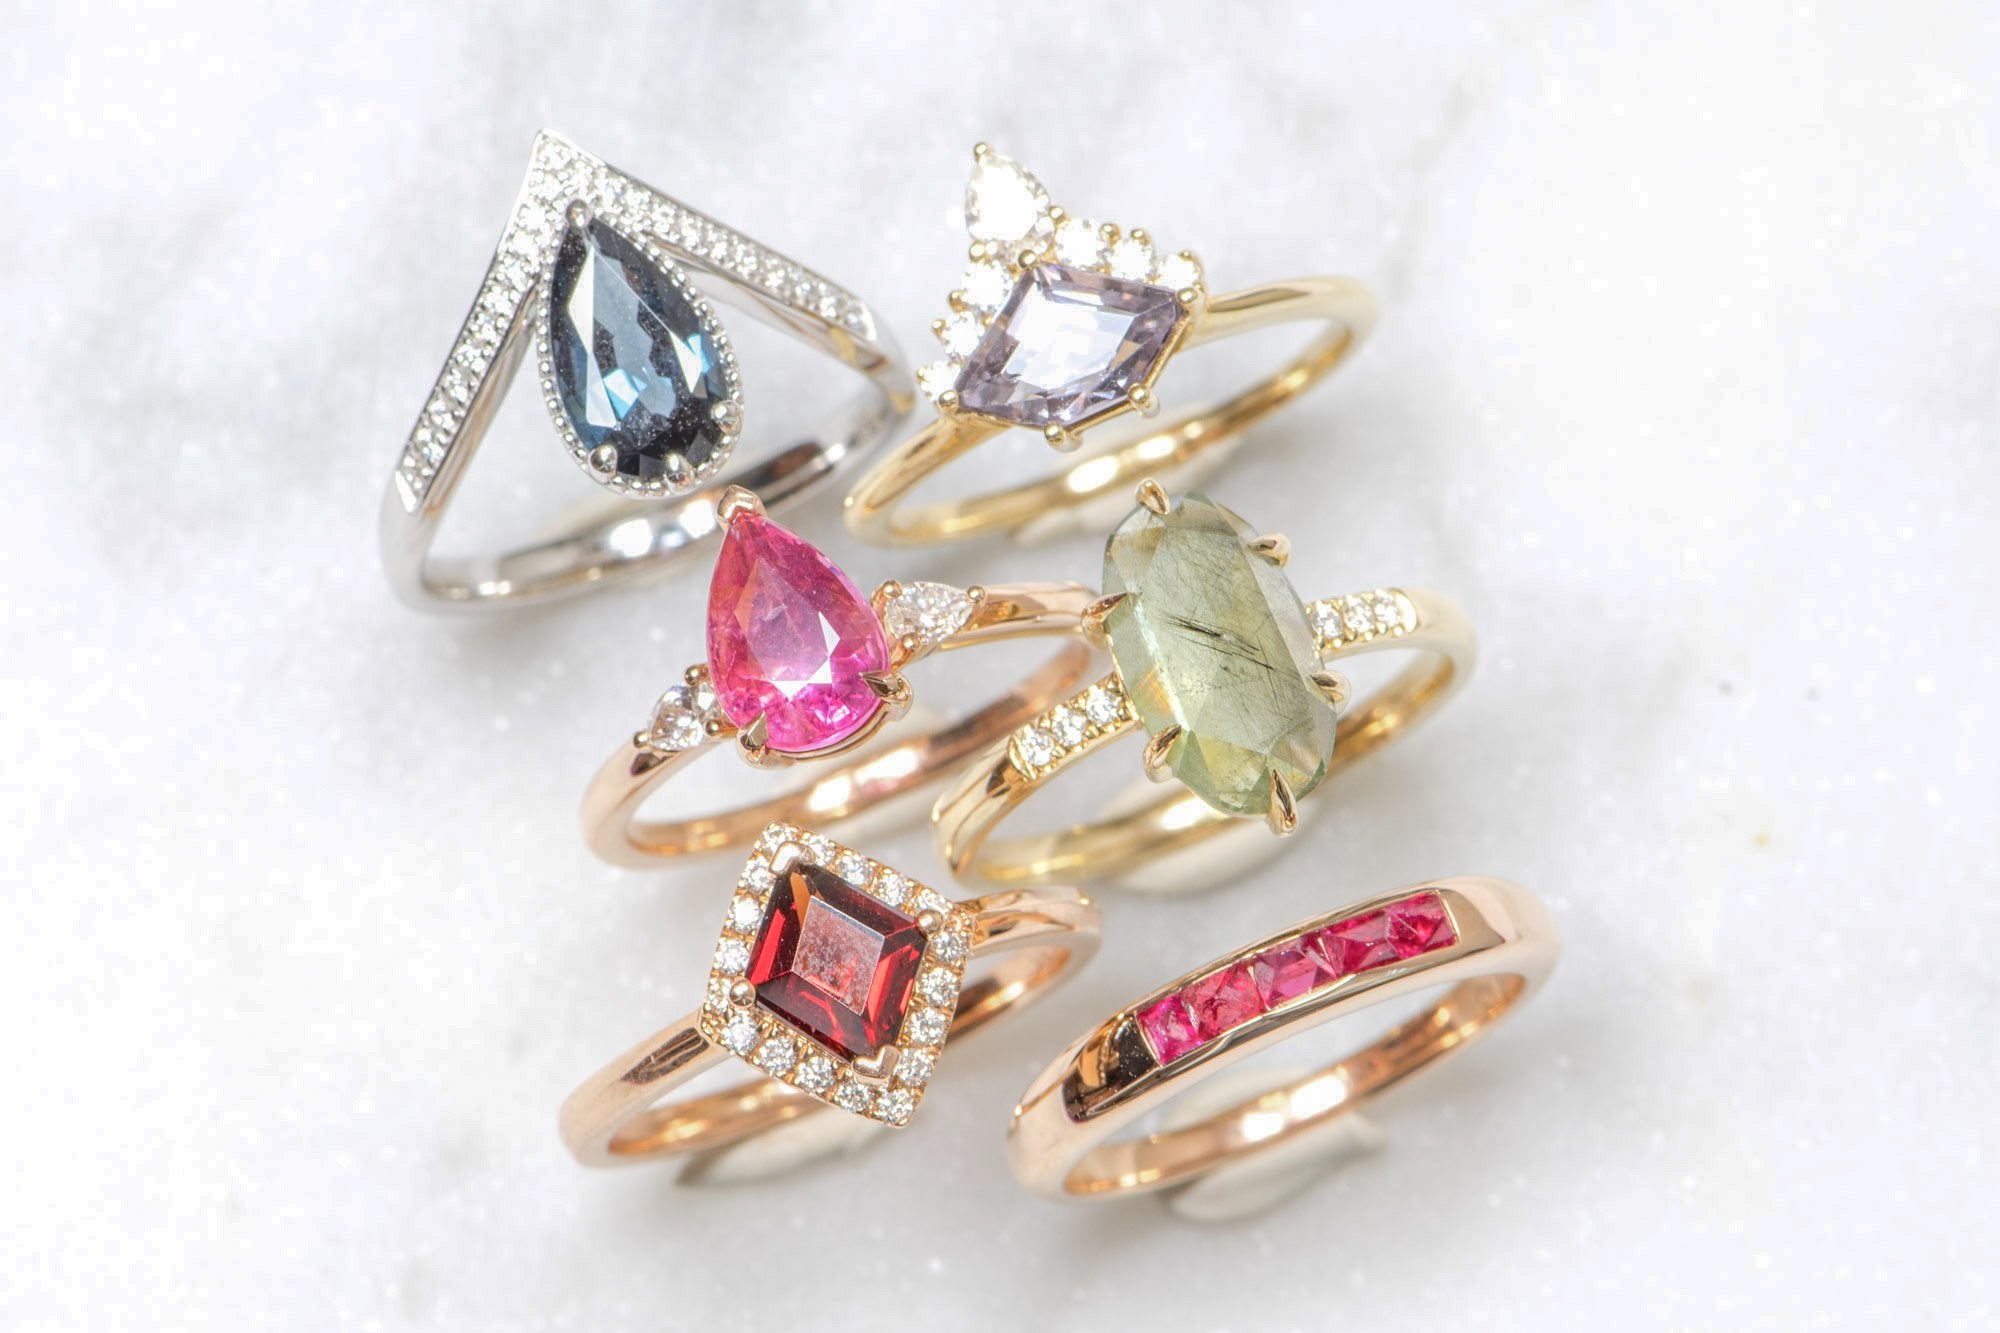 Not Just for Proposals: 10 Rings to Wear for Any Occasion